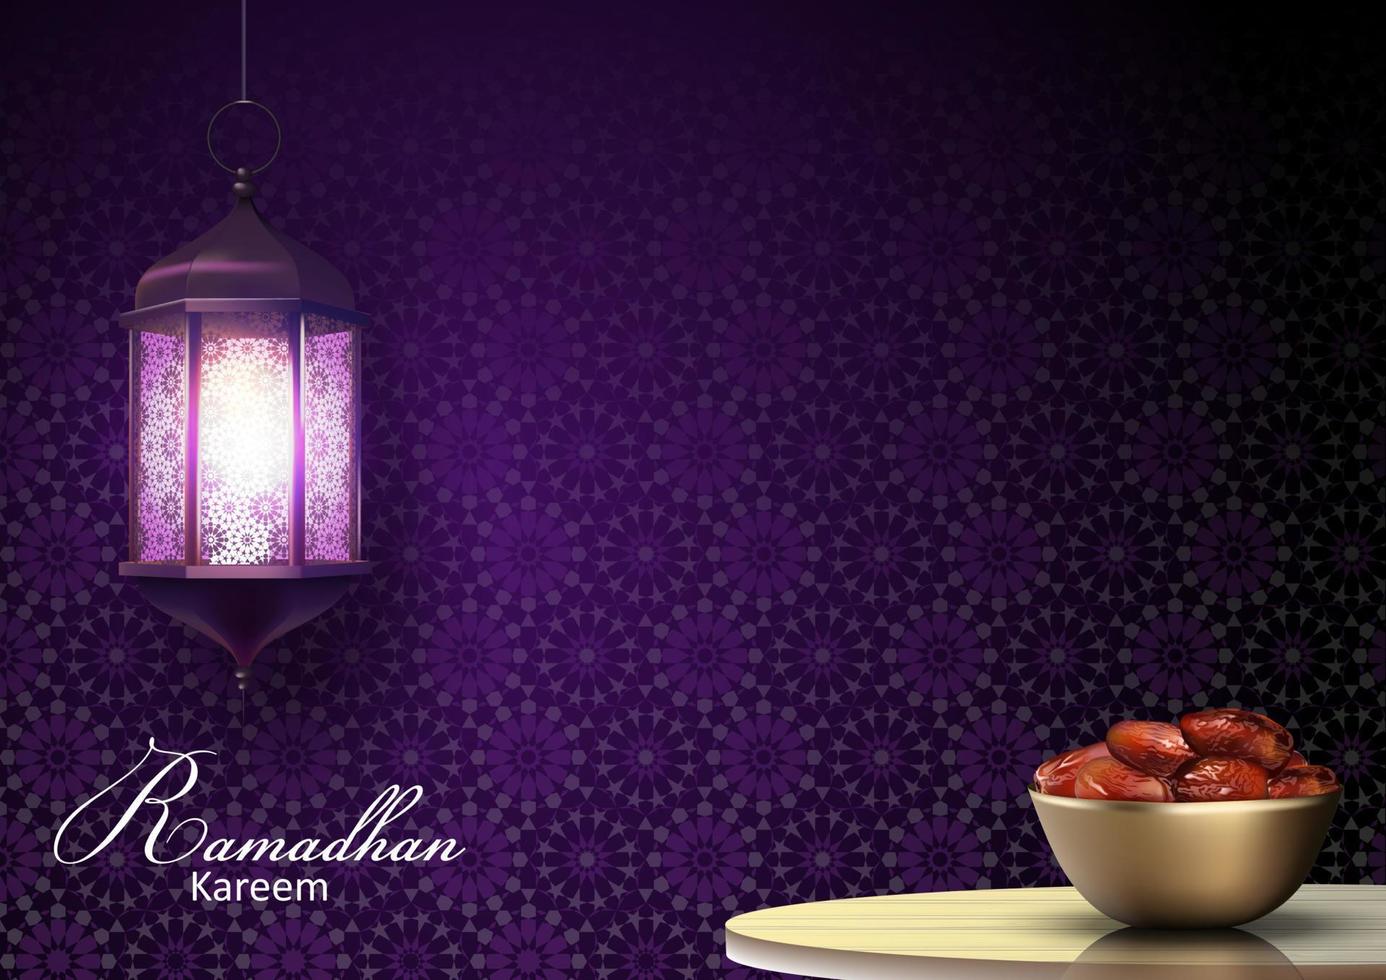 Ramadan Kareem greetings with lanterns hanging and a bowl of dates on dinner table vector